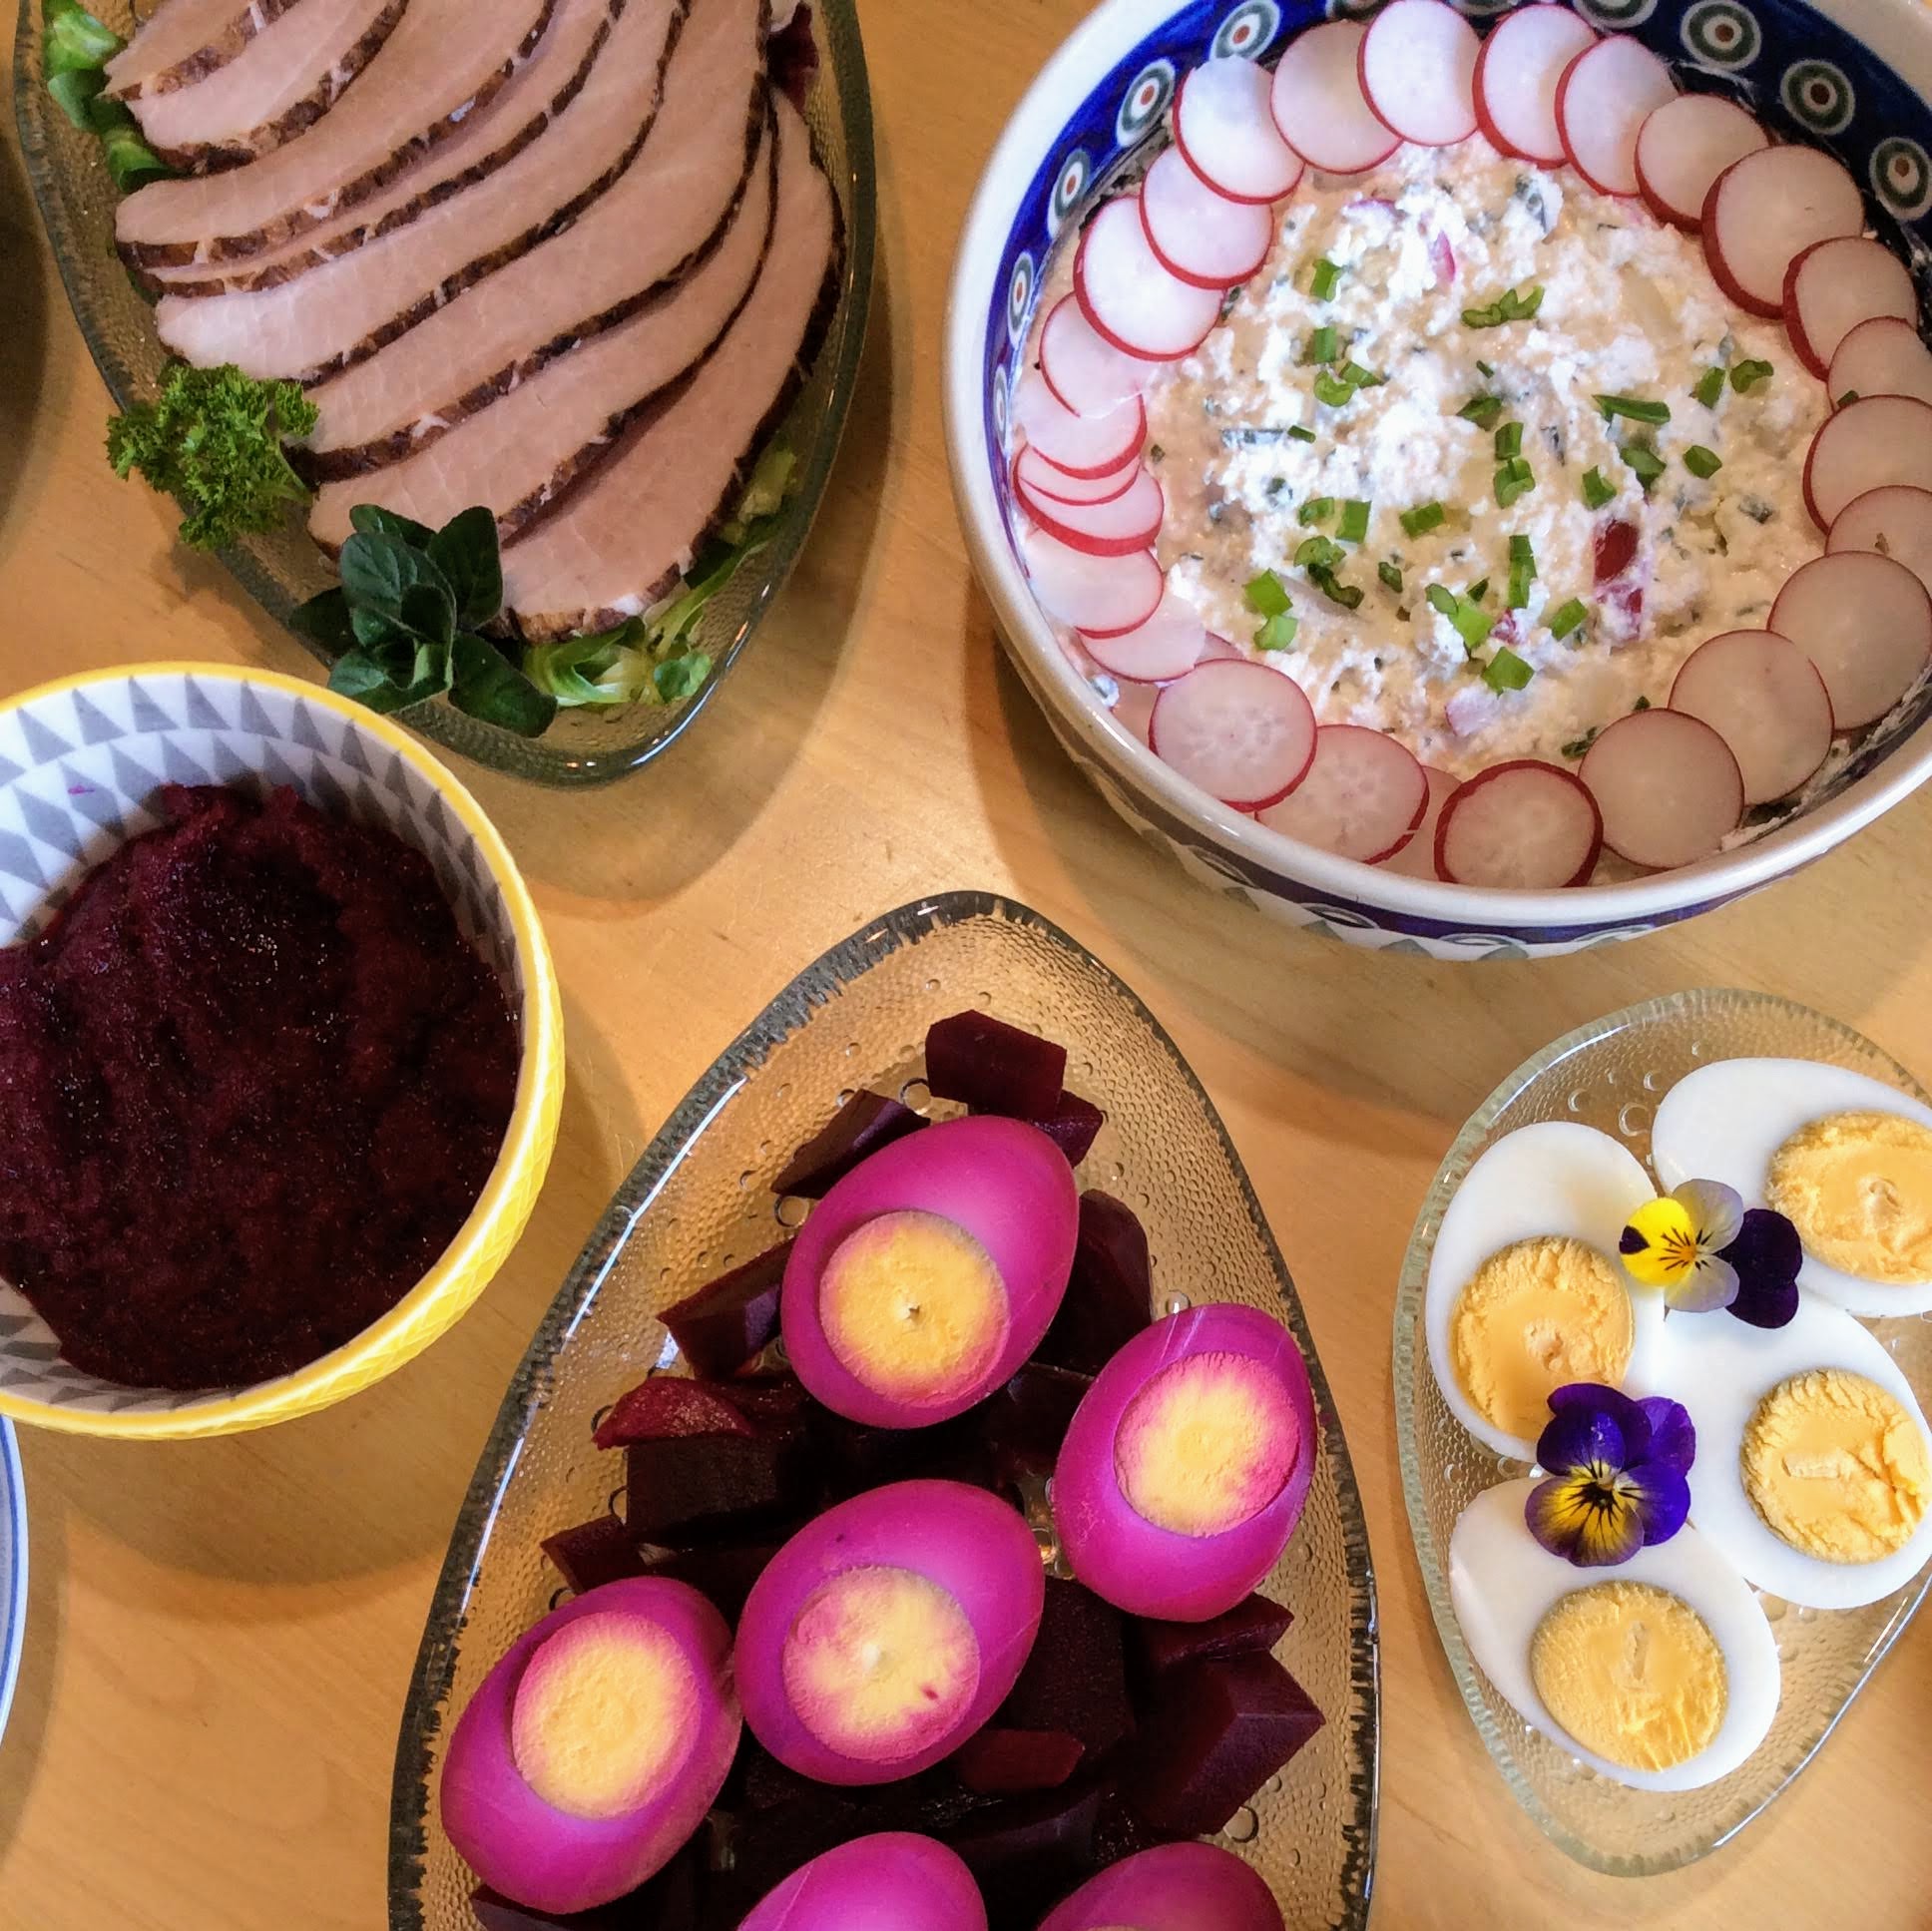 A plate of slice meat, a bowl of radish and cheese salad, a plate of hard-boiled eggs, a plate of pickled eggs, a bowl of beet and horseradish relish for Easter.